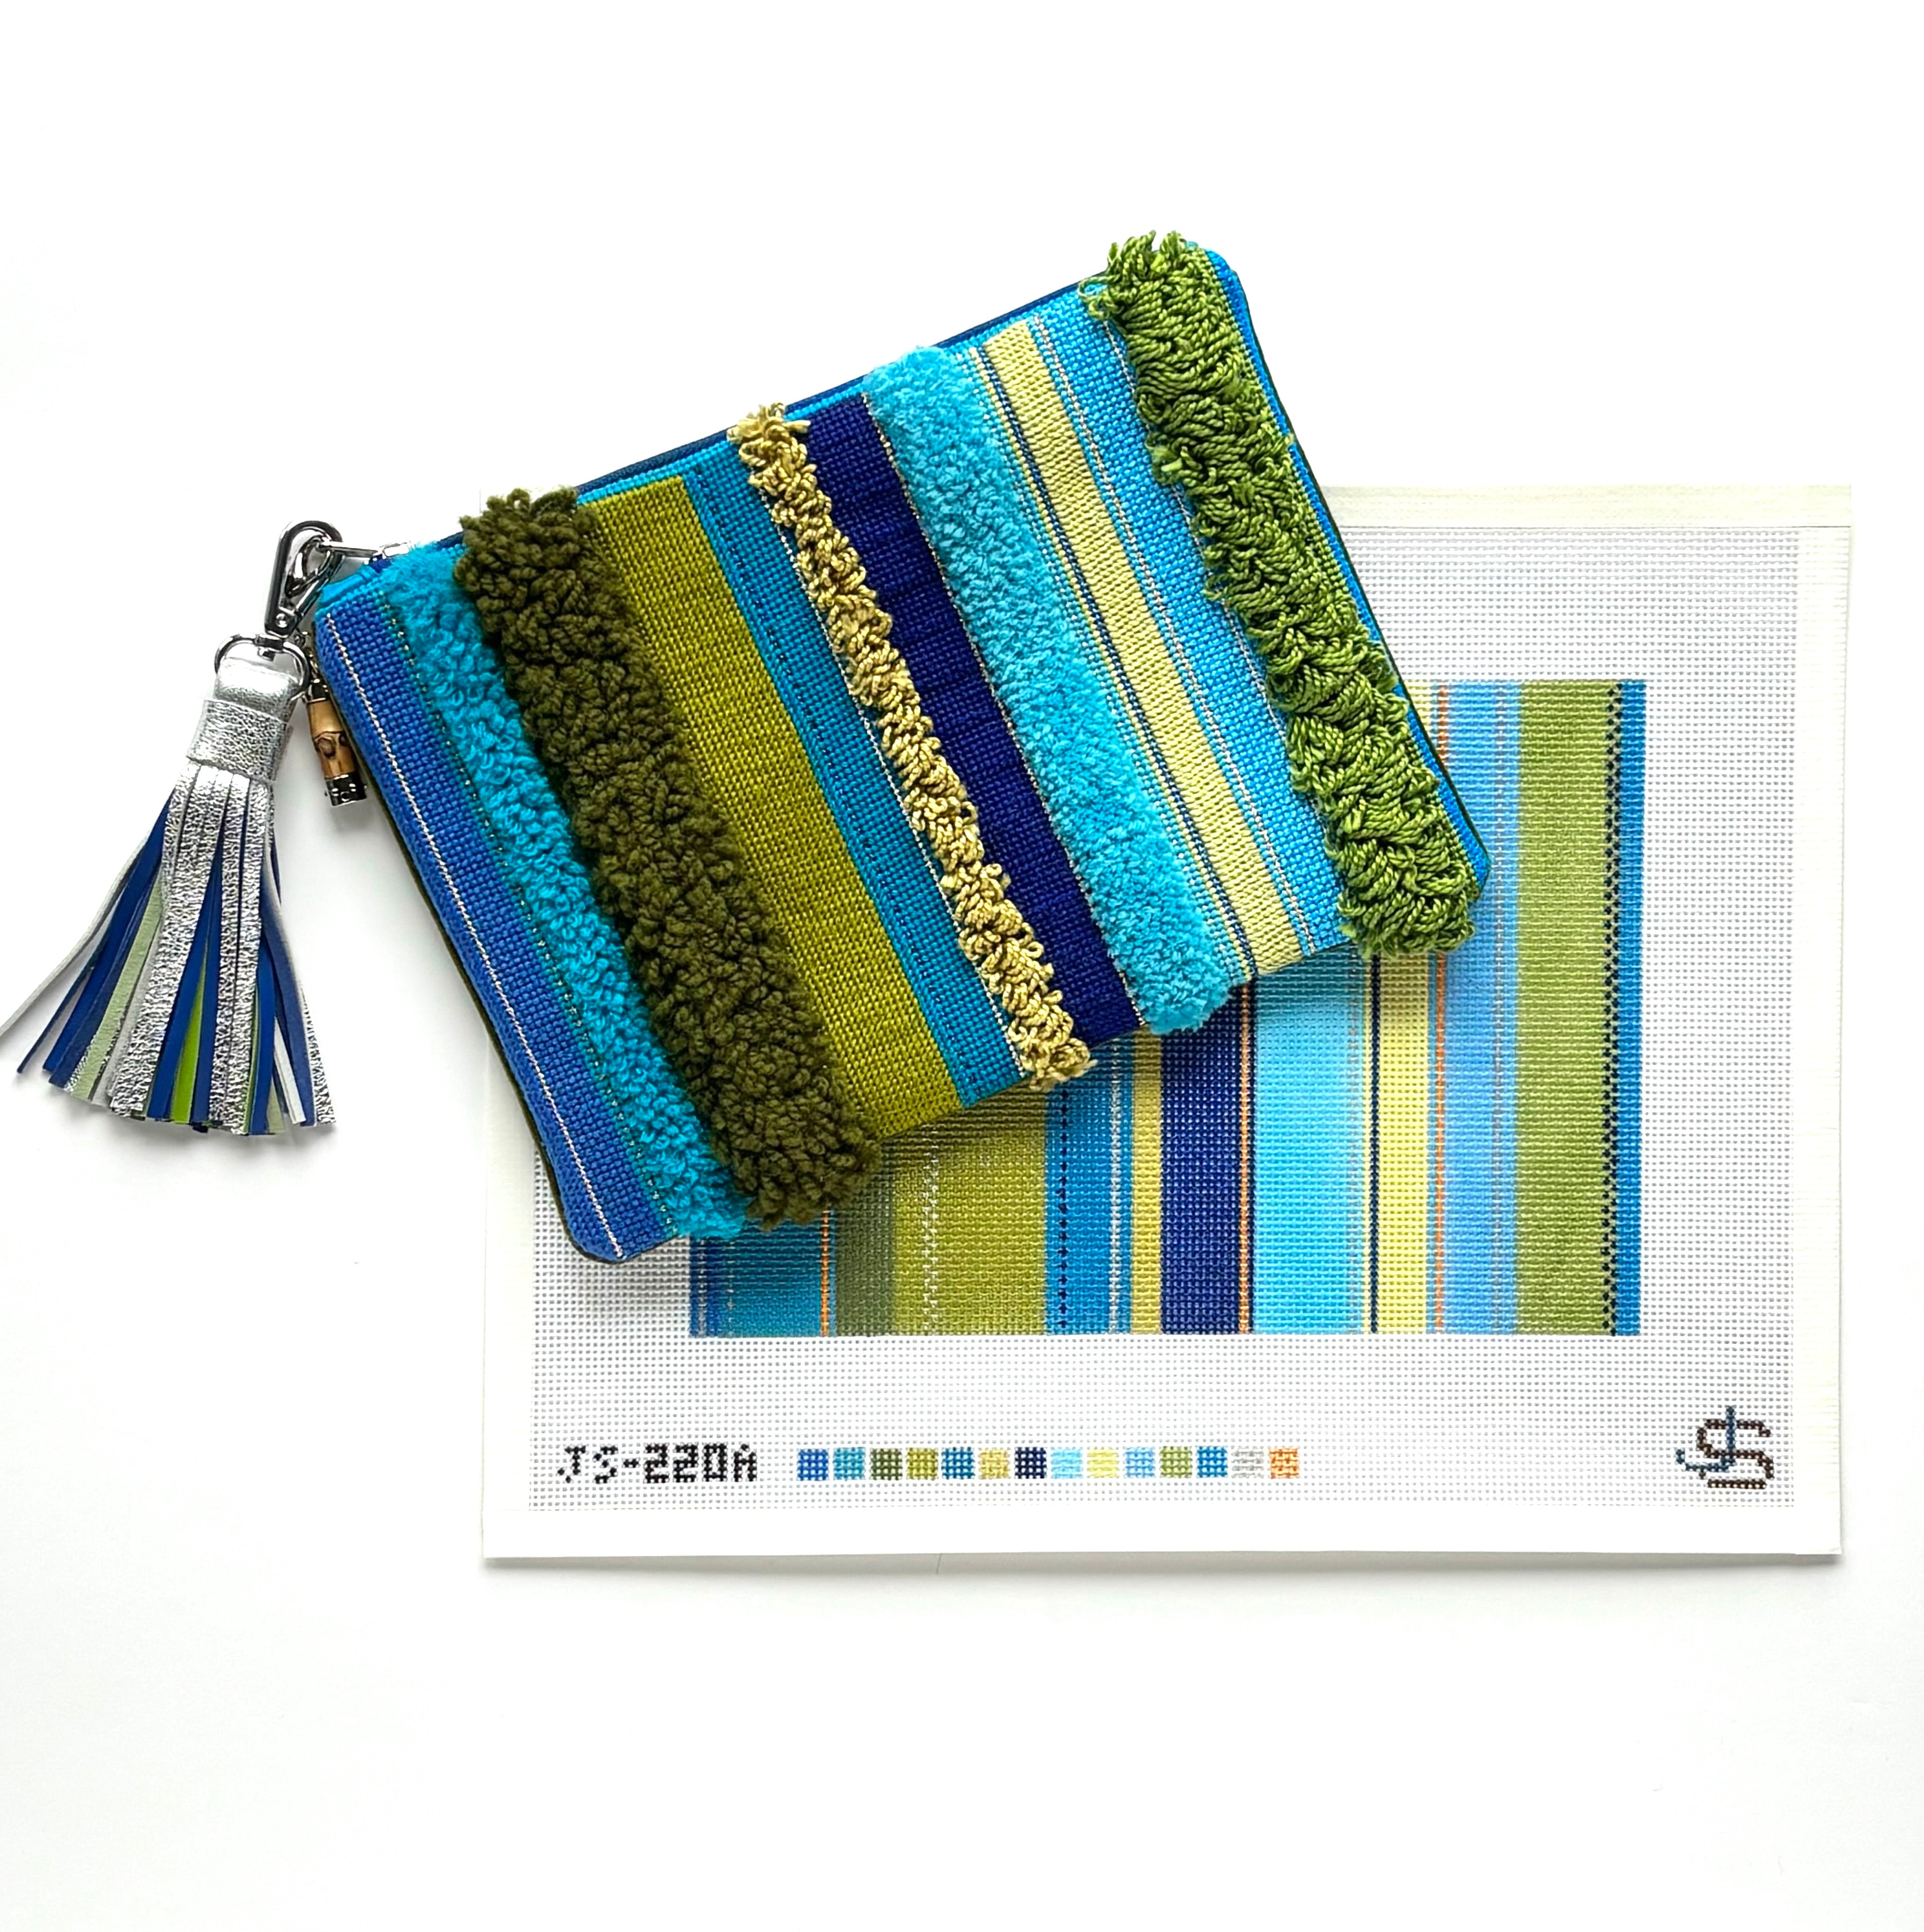 Tufted Stripe clutch - blue and green JS-220A